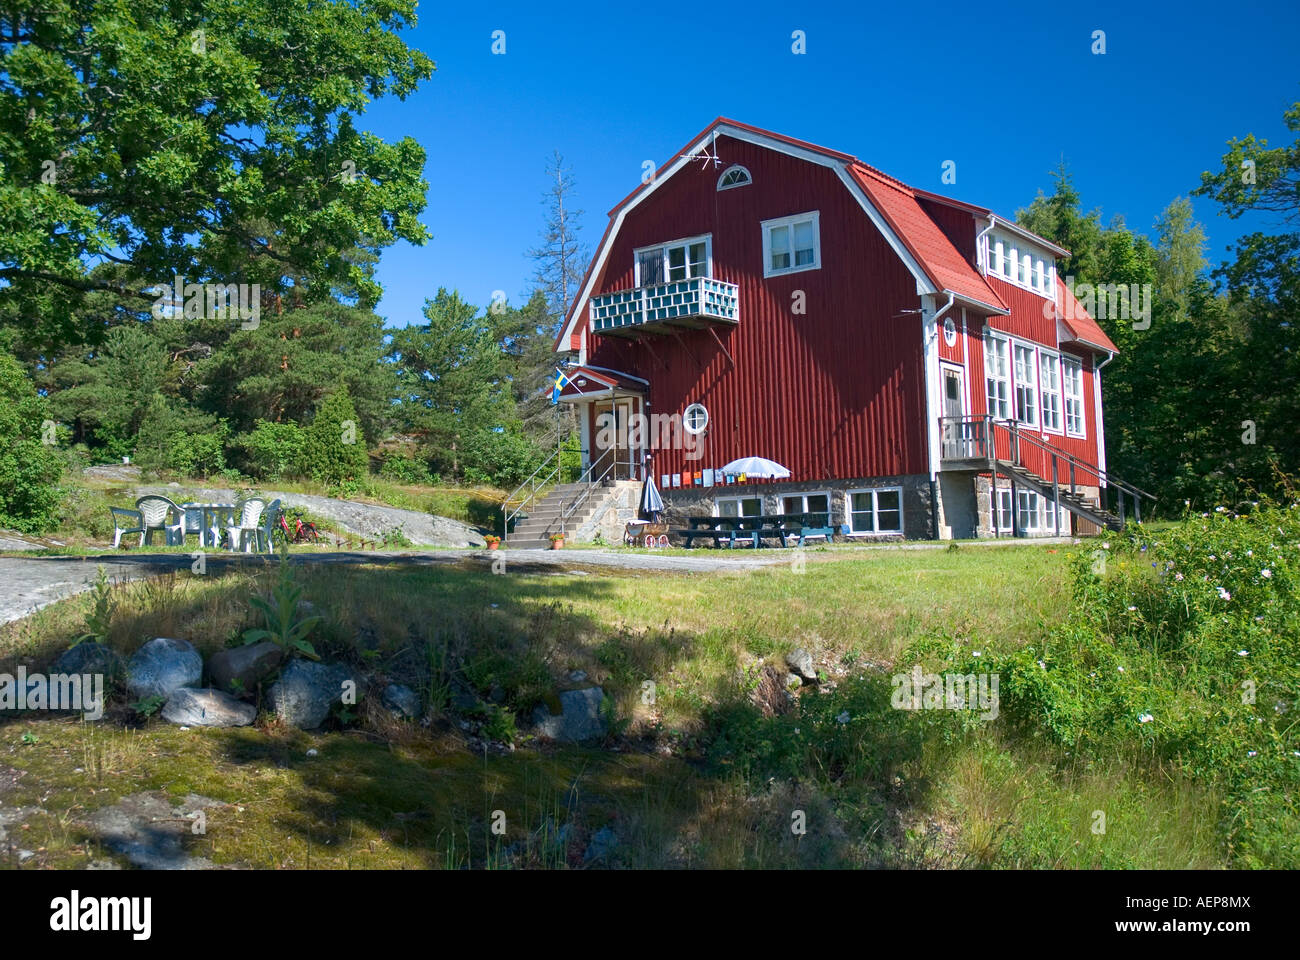 Gästhemmet Möja youth hostel in on Möja island offers budget accommodation in the beautiful archipelago of Stockholm Sweden Stock Photo